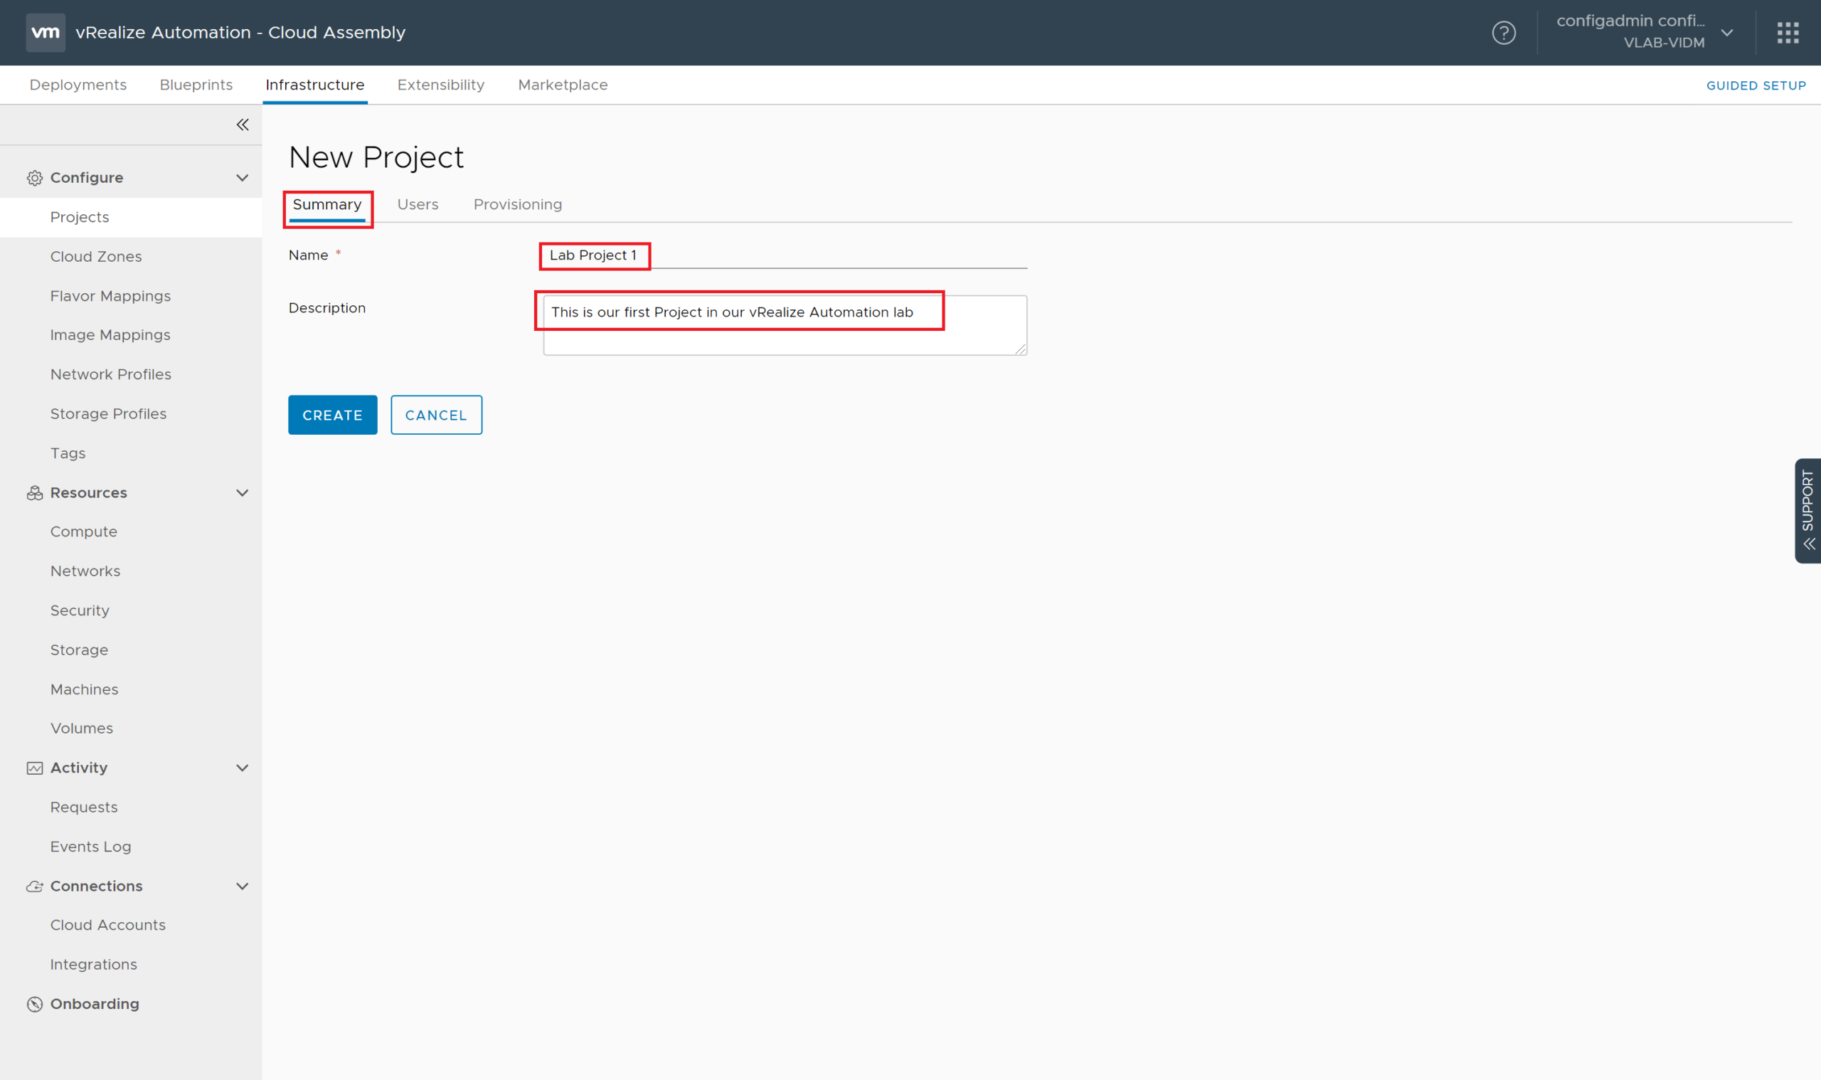 vRealize Automation 8.0 - Cloud Assembly - Projects - New Project - Summary